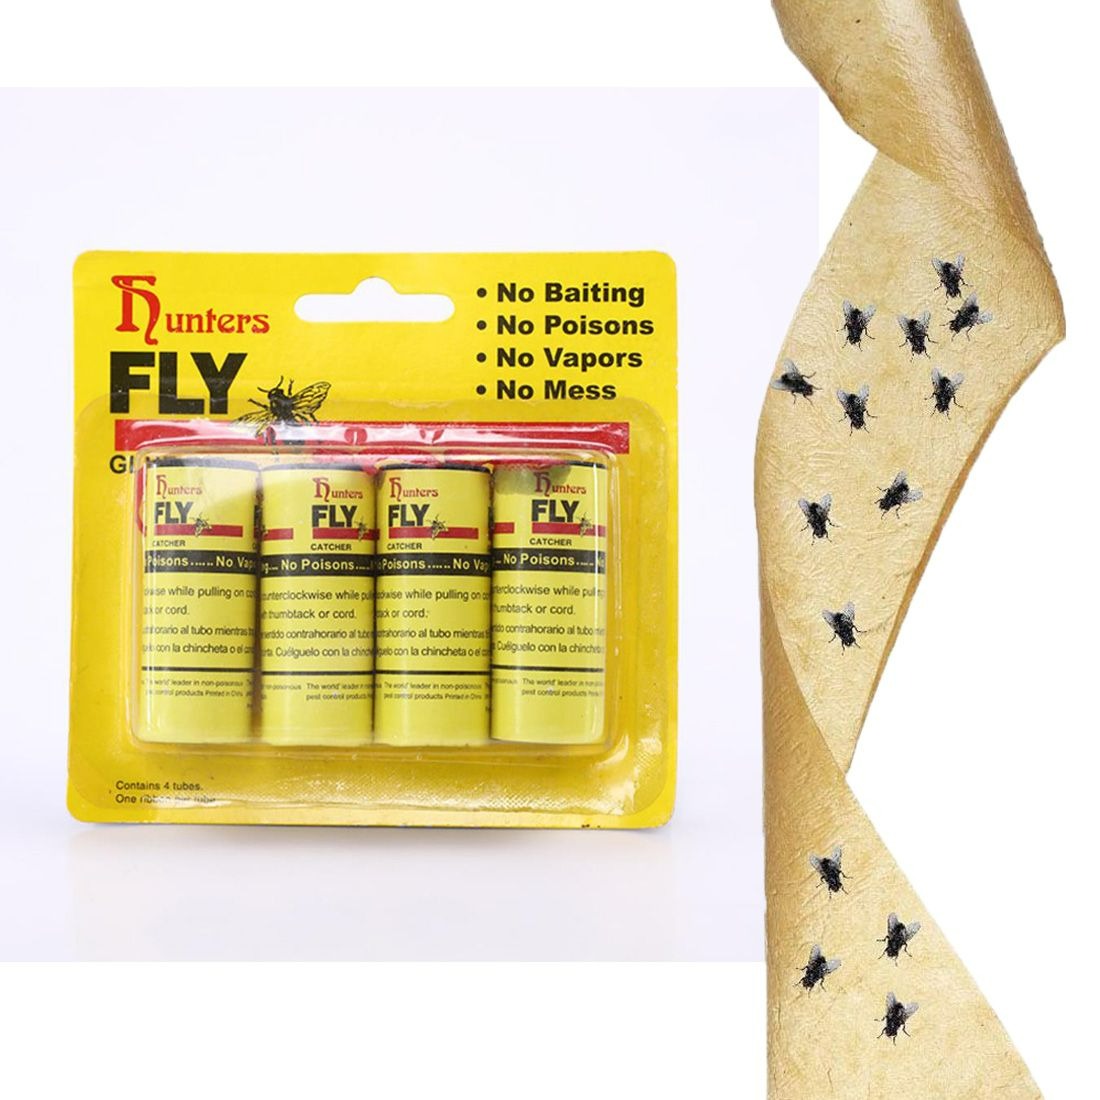 NOGIS 16 Pcs Fly Strips Indoor Sticky Hanging with Pins. Fly Trap